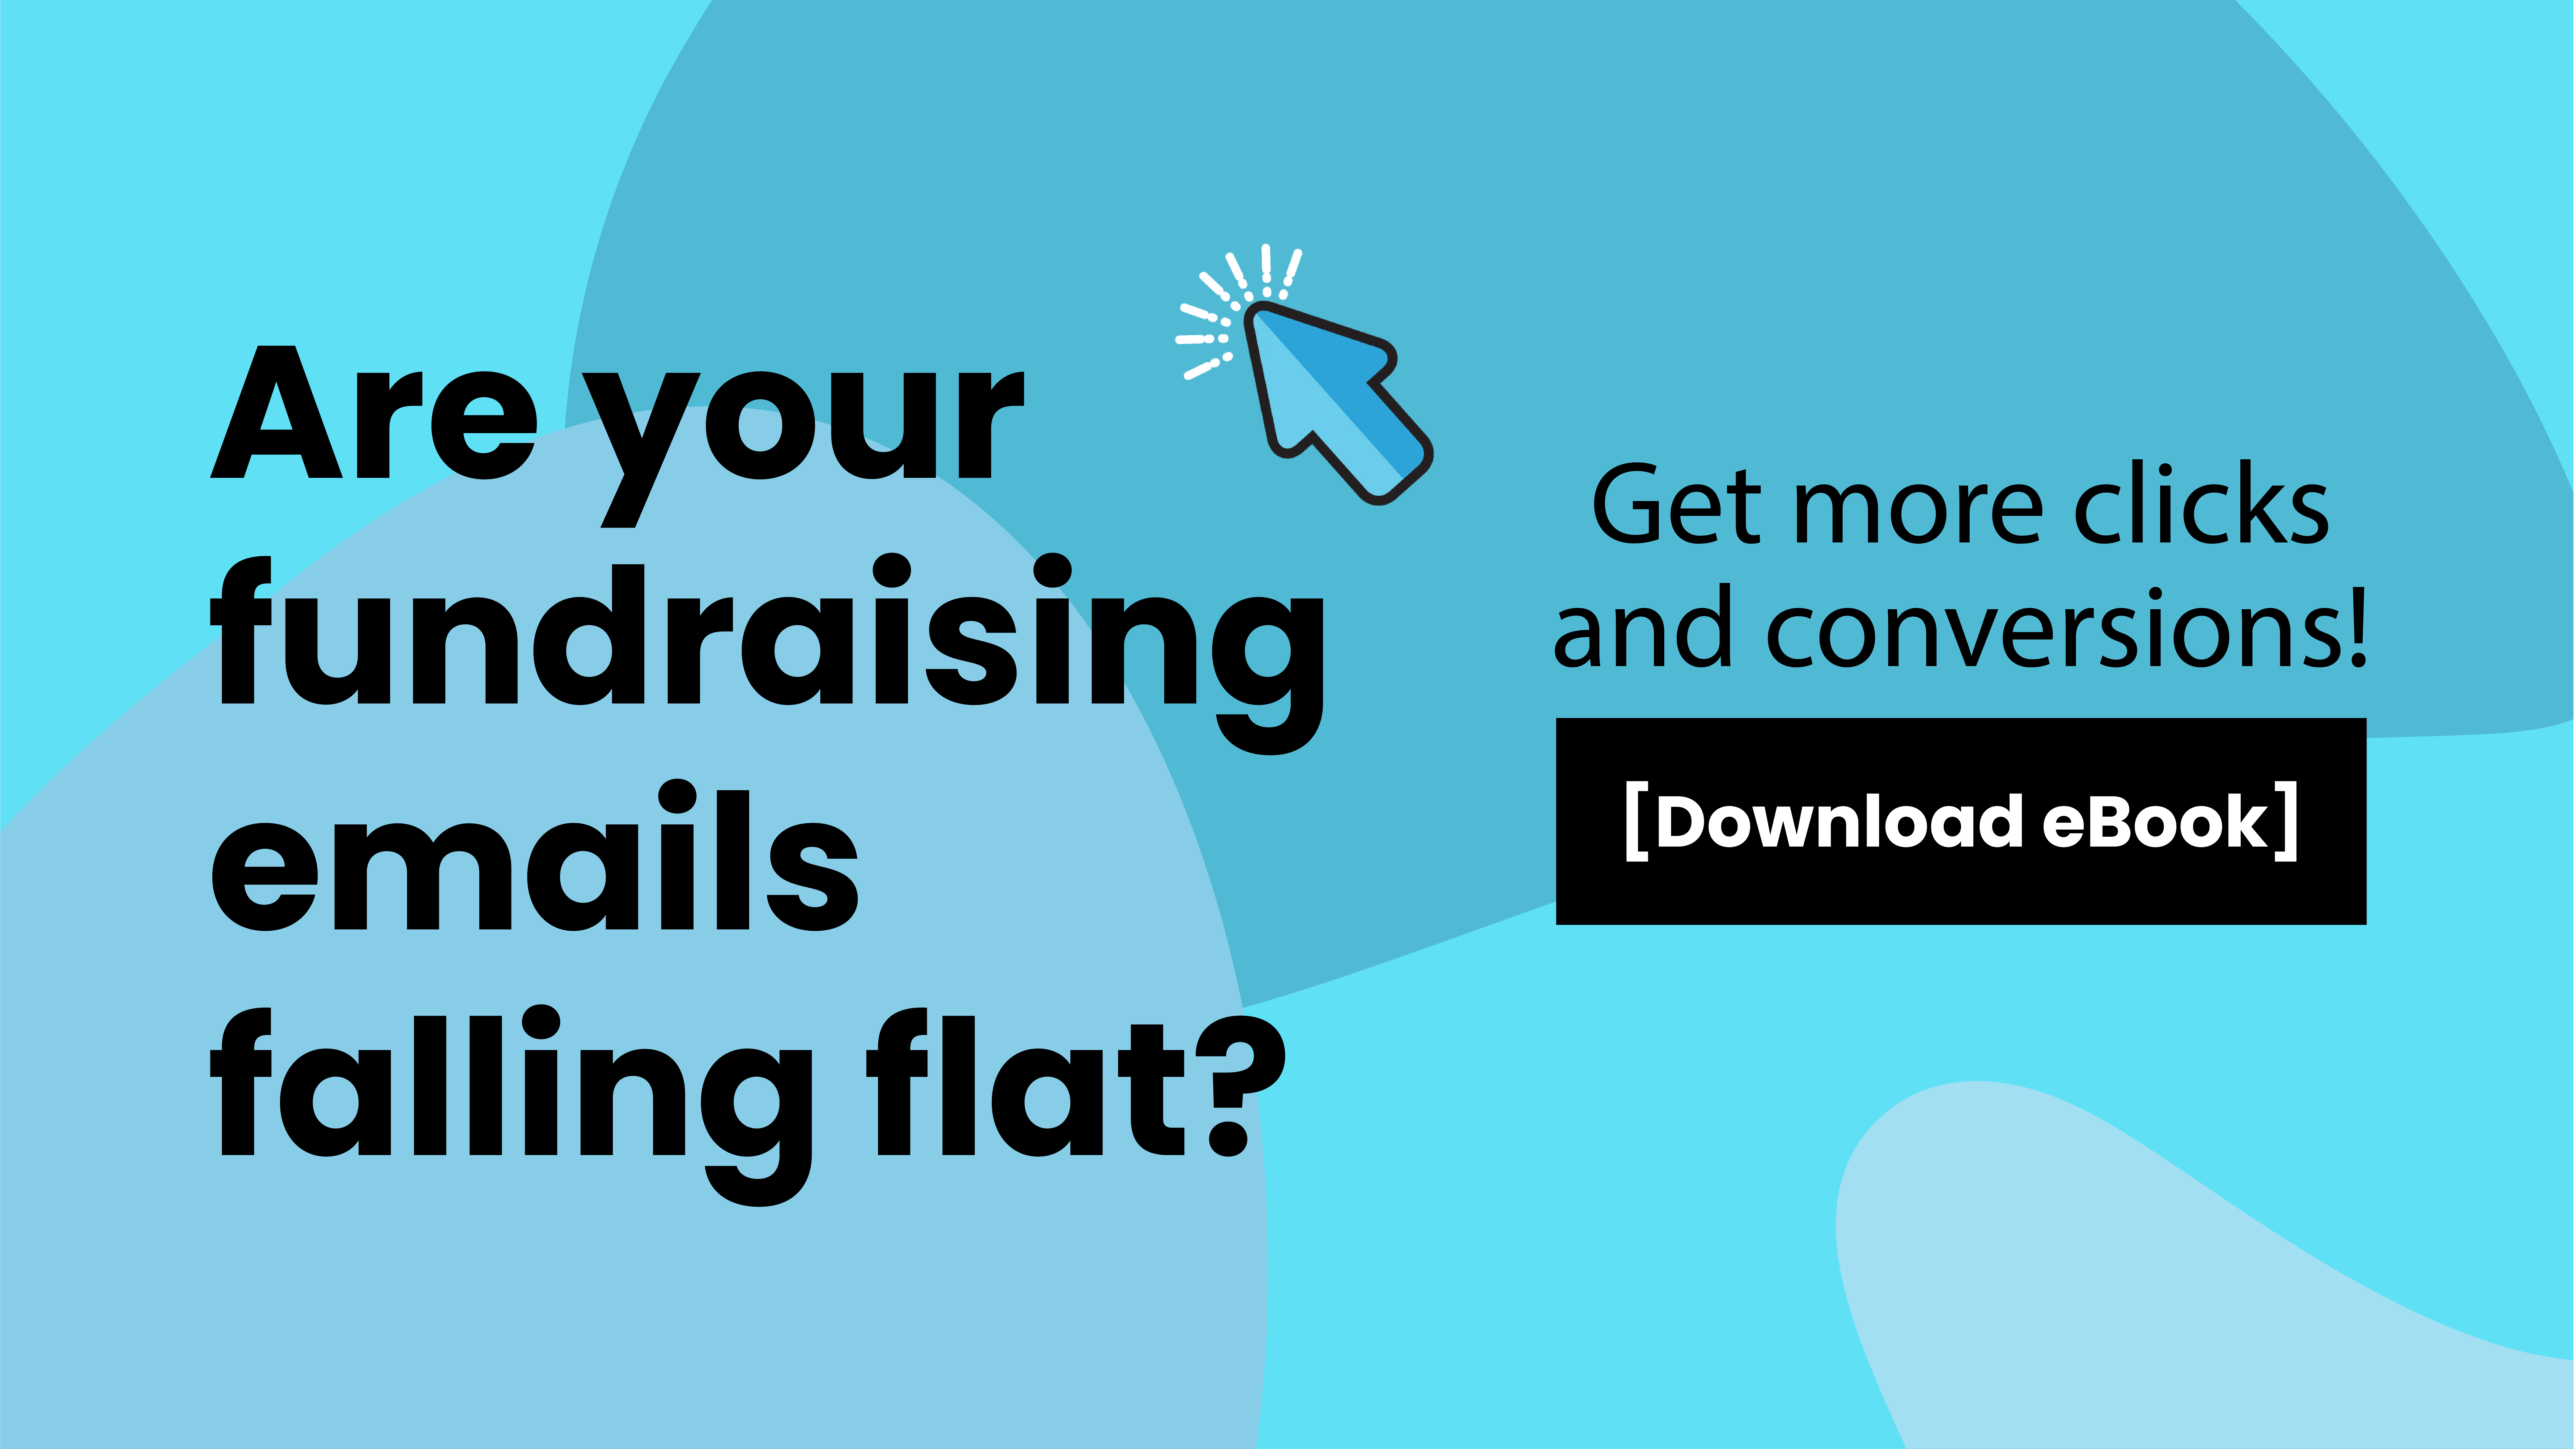 FREE eBook: Fantastic fundraising emails - The complete guide for nonprofits.